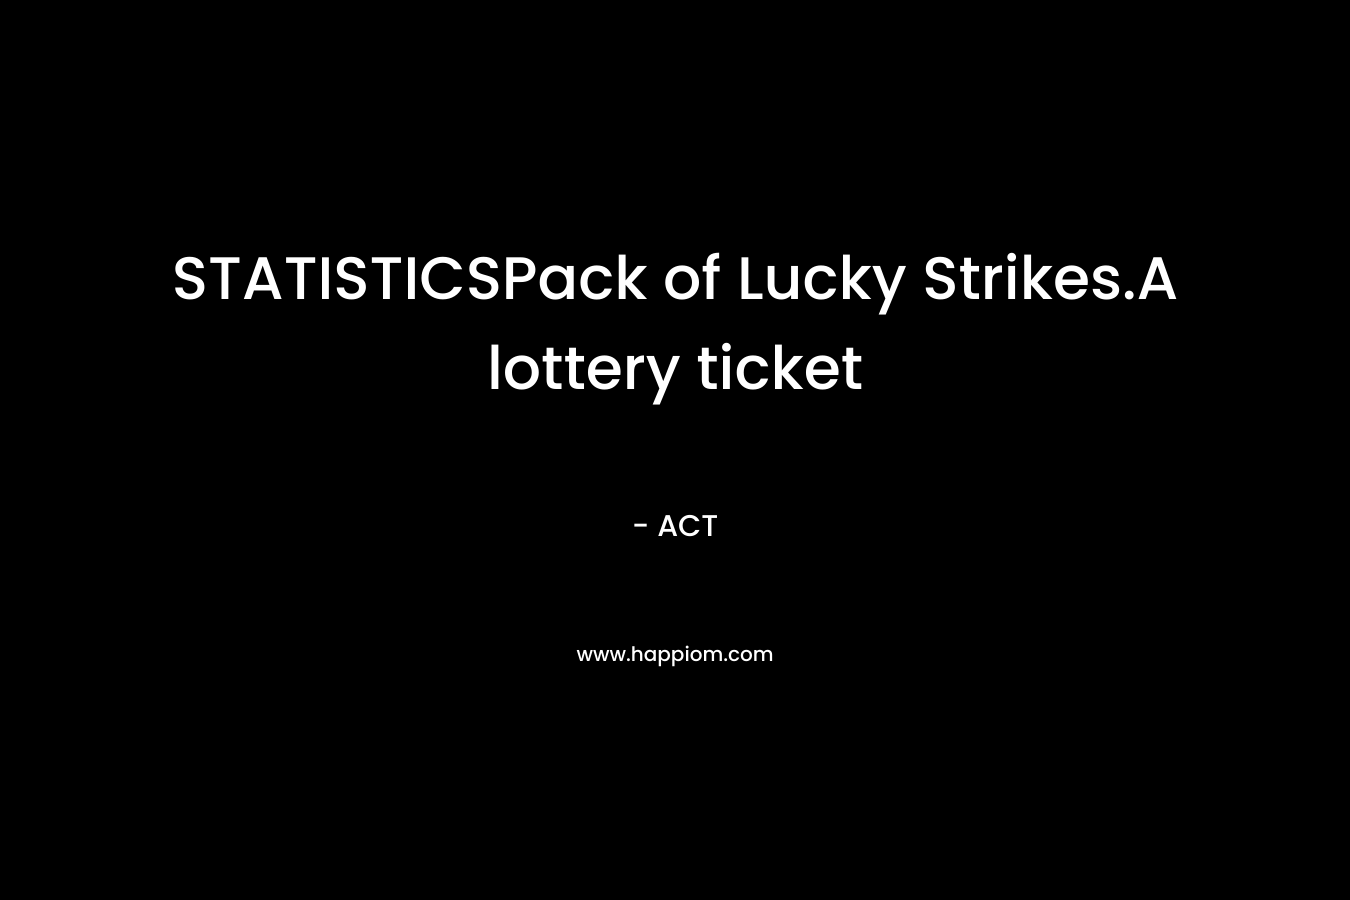 STATISTICSPack of Lucky Strikes.A lottery ticket